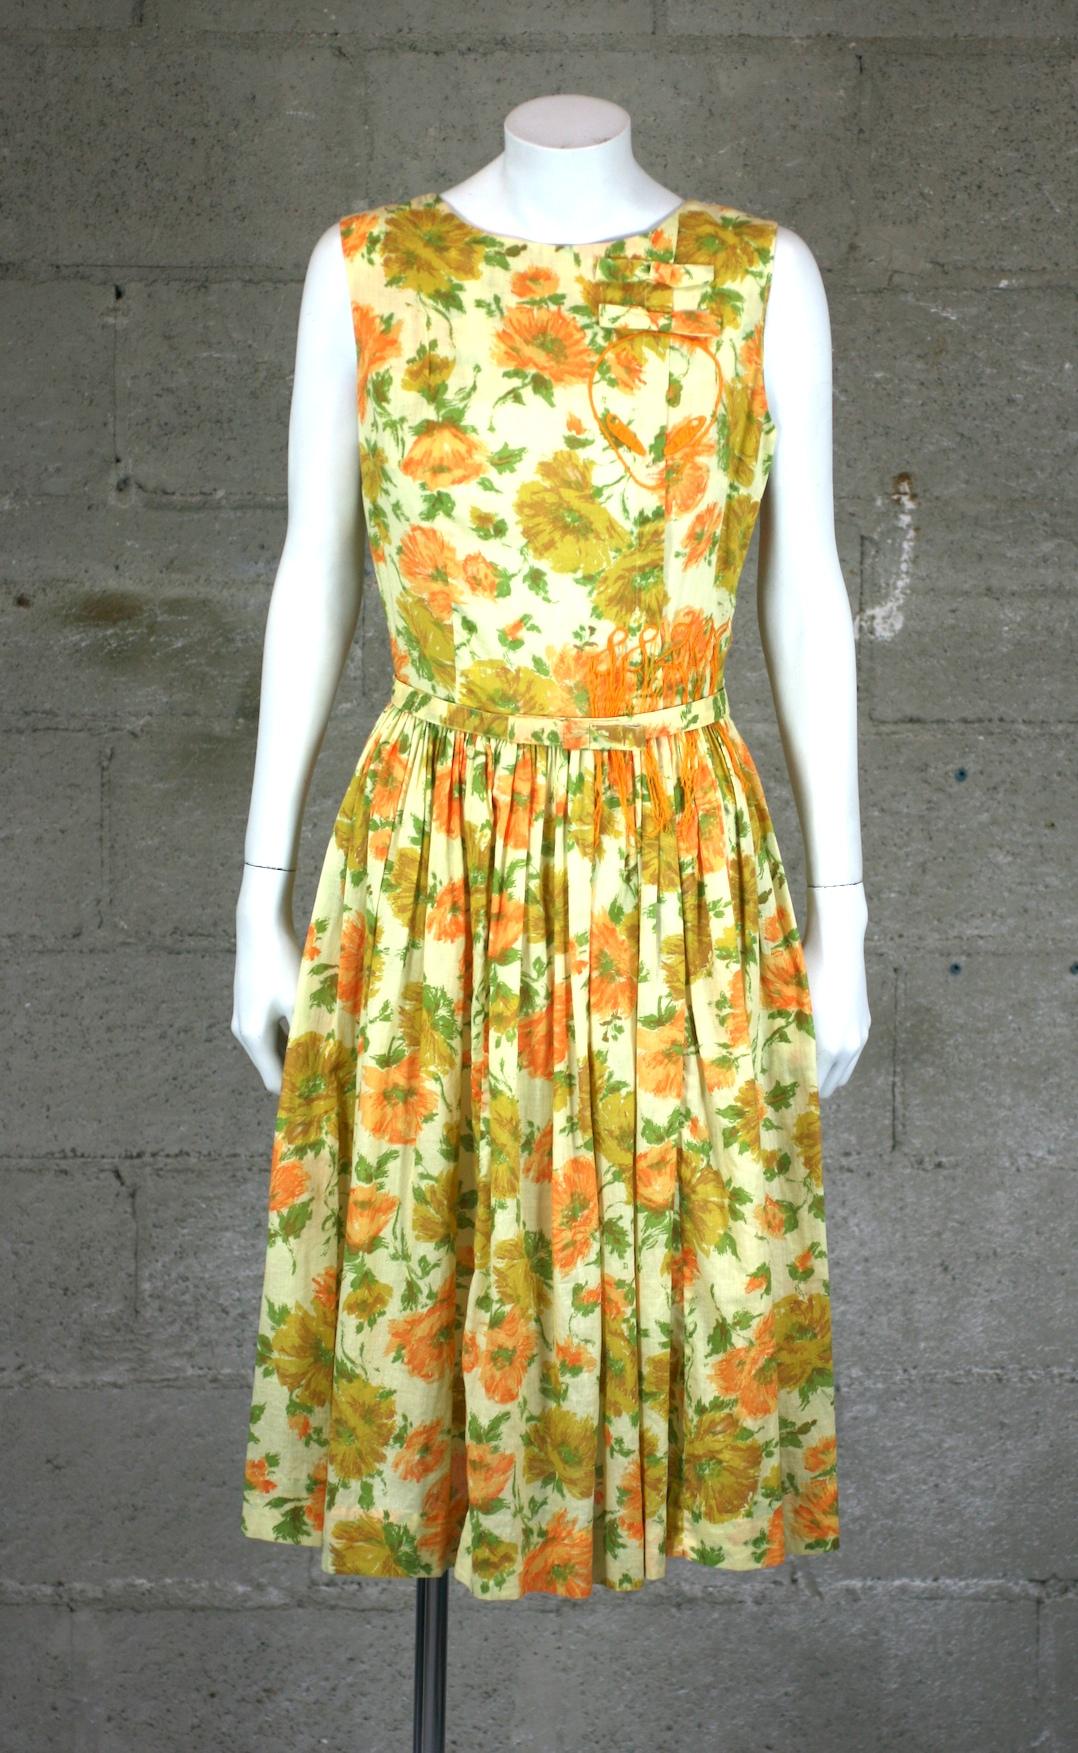 Upcycled 1950's Dress with a muted print of sunflowers on a soft cotton batiste by Studio VL. Typical wasp waist styling with self belt with bow motif. 
We have hand embroidered an subtle alien head motif (with a bow in her hair) as well as the zip